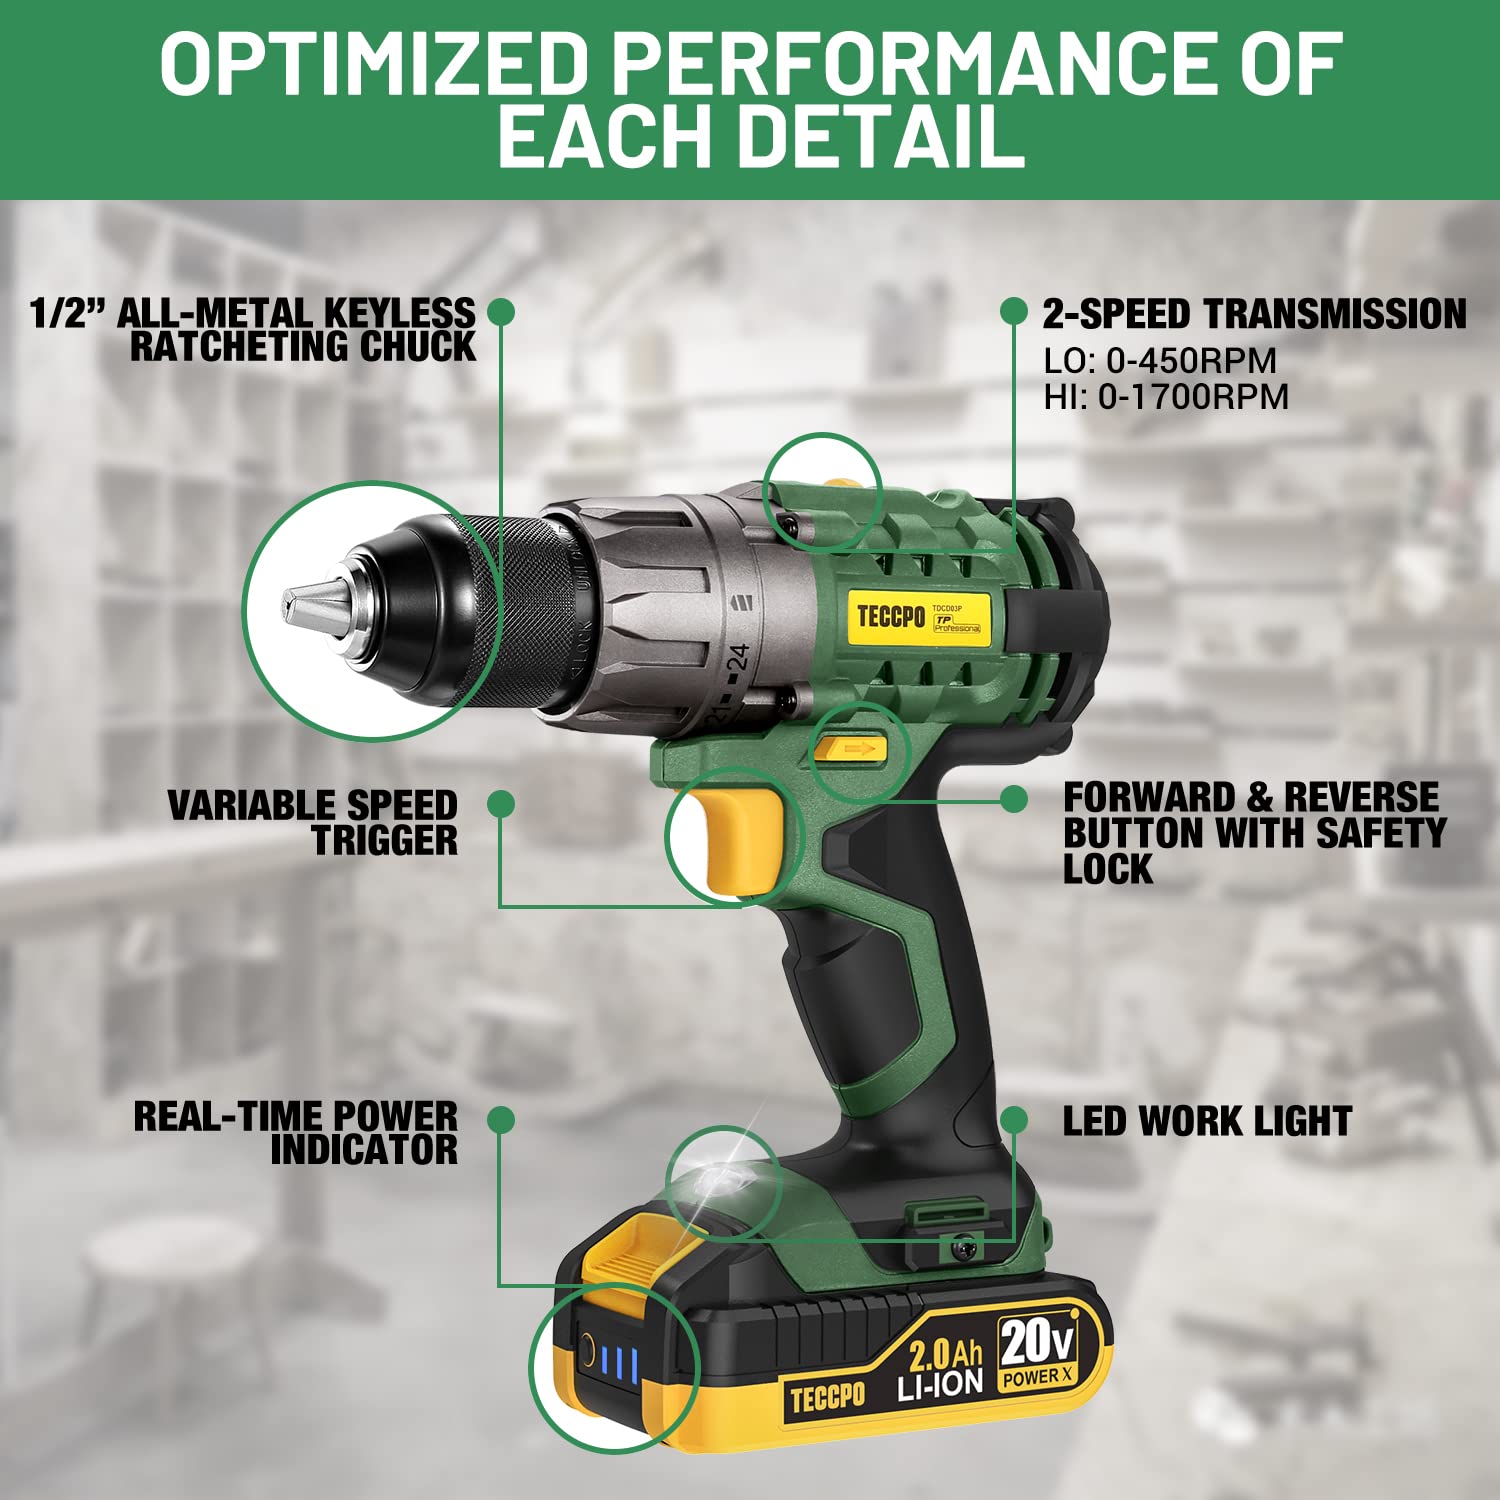 TECCPO Power Drill, Cordless Drill with Battery and Charger(2000mAh), 530 In-lbs, 24+1 Torque Setting, 0-1700RPM Variable Speed, 33pcs Accessories Drill Set, Drill with 1/2